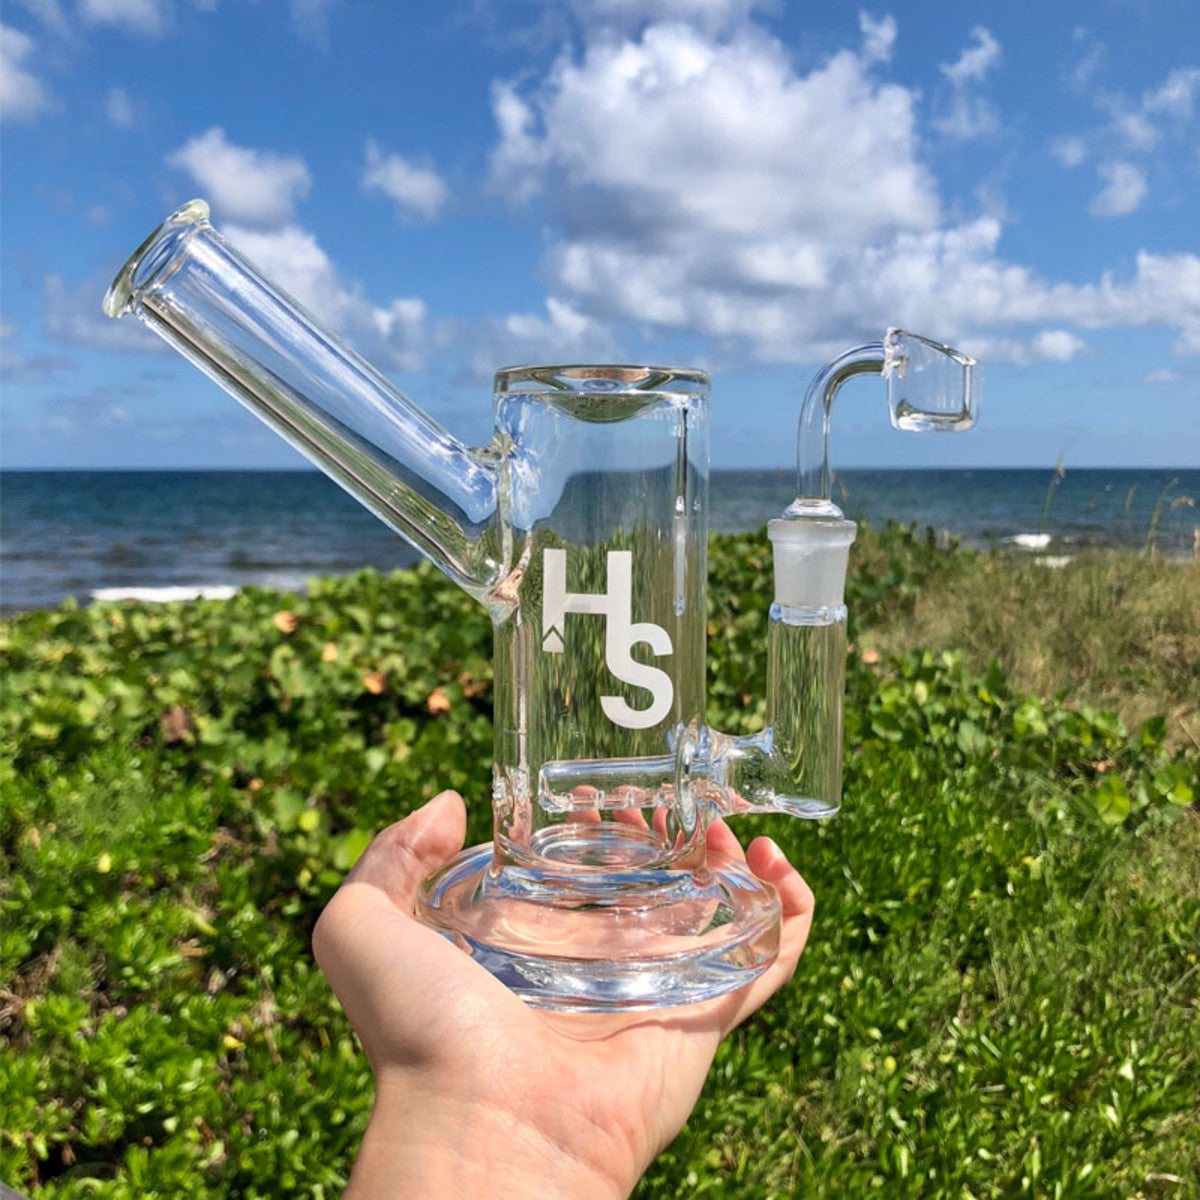 Higher Standards Heavy Duty Rig. Medical-Grade Borosilicate Glass Rig that has been Handcrafted for Powerful, Reliable Performance. Features a Quartz Banger for Optimal Flavor Transfer. MOST DIVERSE CBD CONCENTRATE COLLECTION ON THE WEB. Live Resin, Wax, Shatter &amp;MORE! Glass Rigs, Pipes. Dab, Vape, Smoke Accessories. Top Shelf CBD Hemp Flower. - Sauce Warehouse